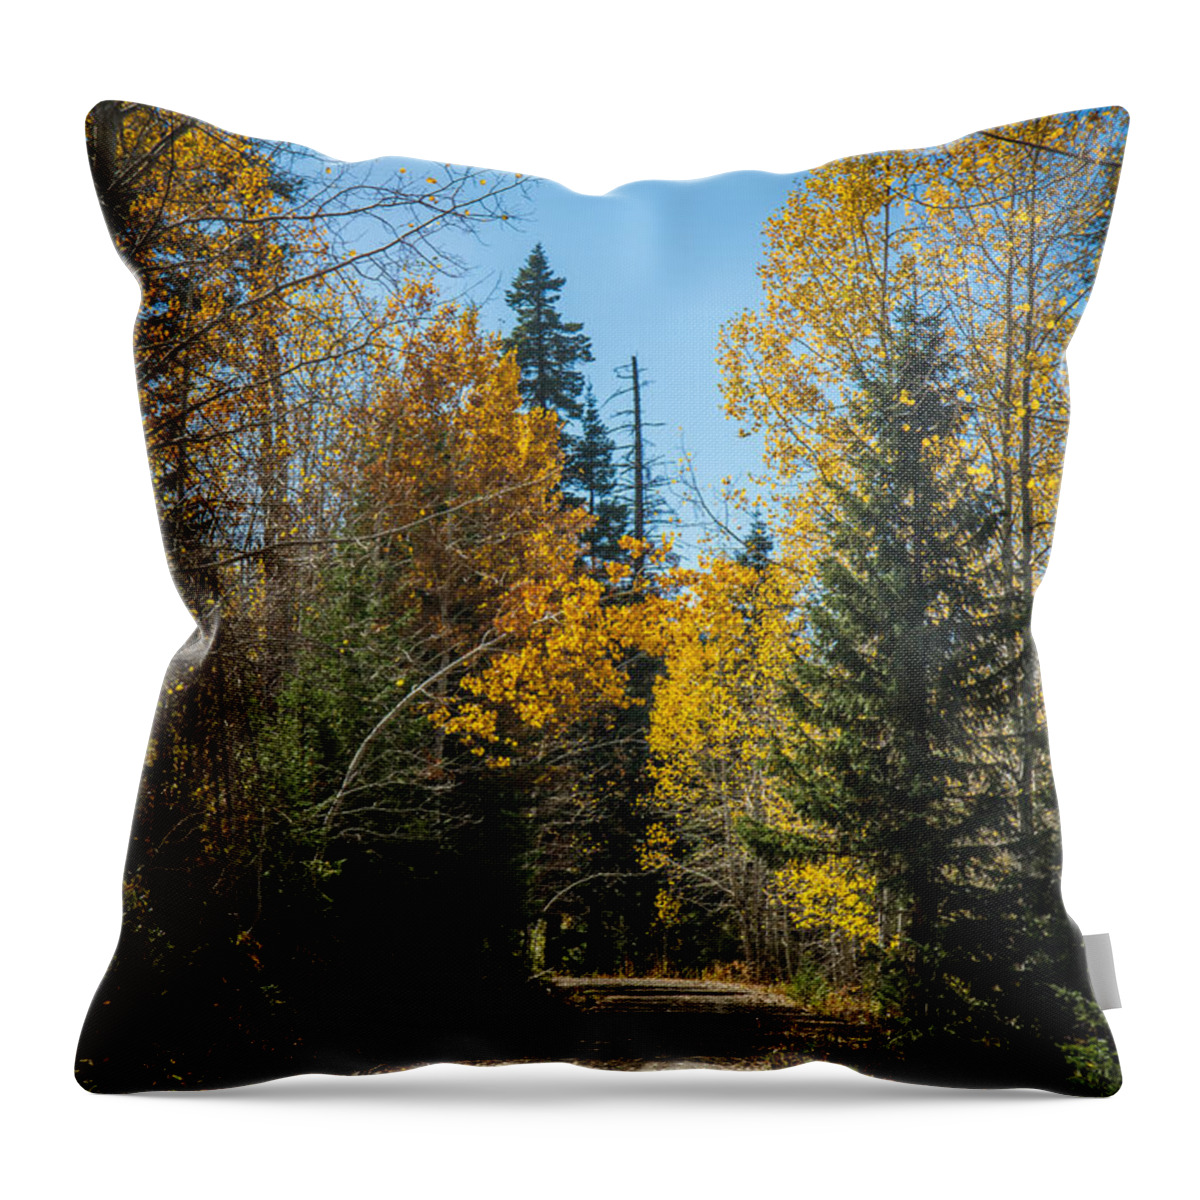 Autumn Throw Pillow featuring the photograph Road To Fall Colors by Robert Bales